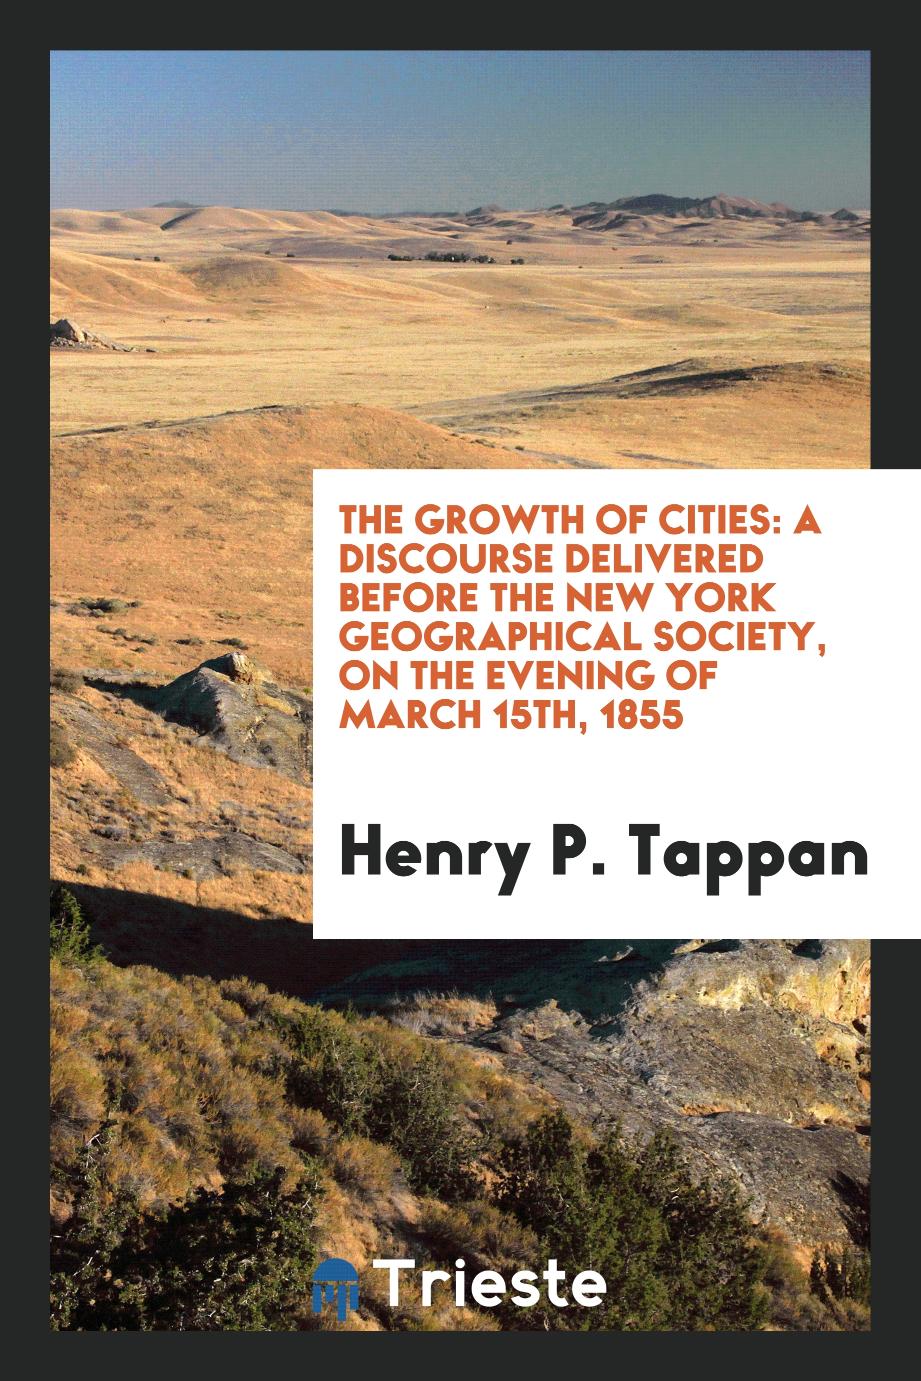 The Growth of Cities: A Discourse Delivered Before the New York Geographical Society, on the evening of March 15th, 1855